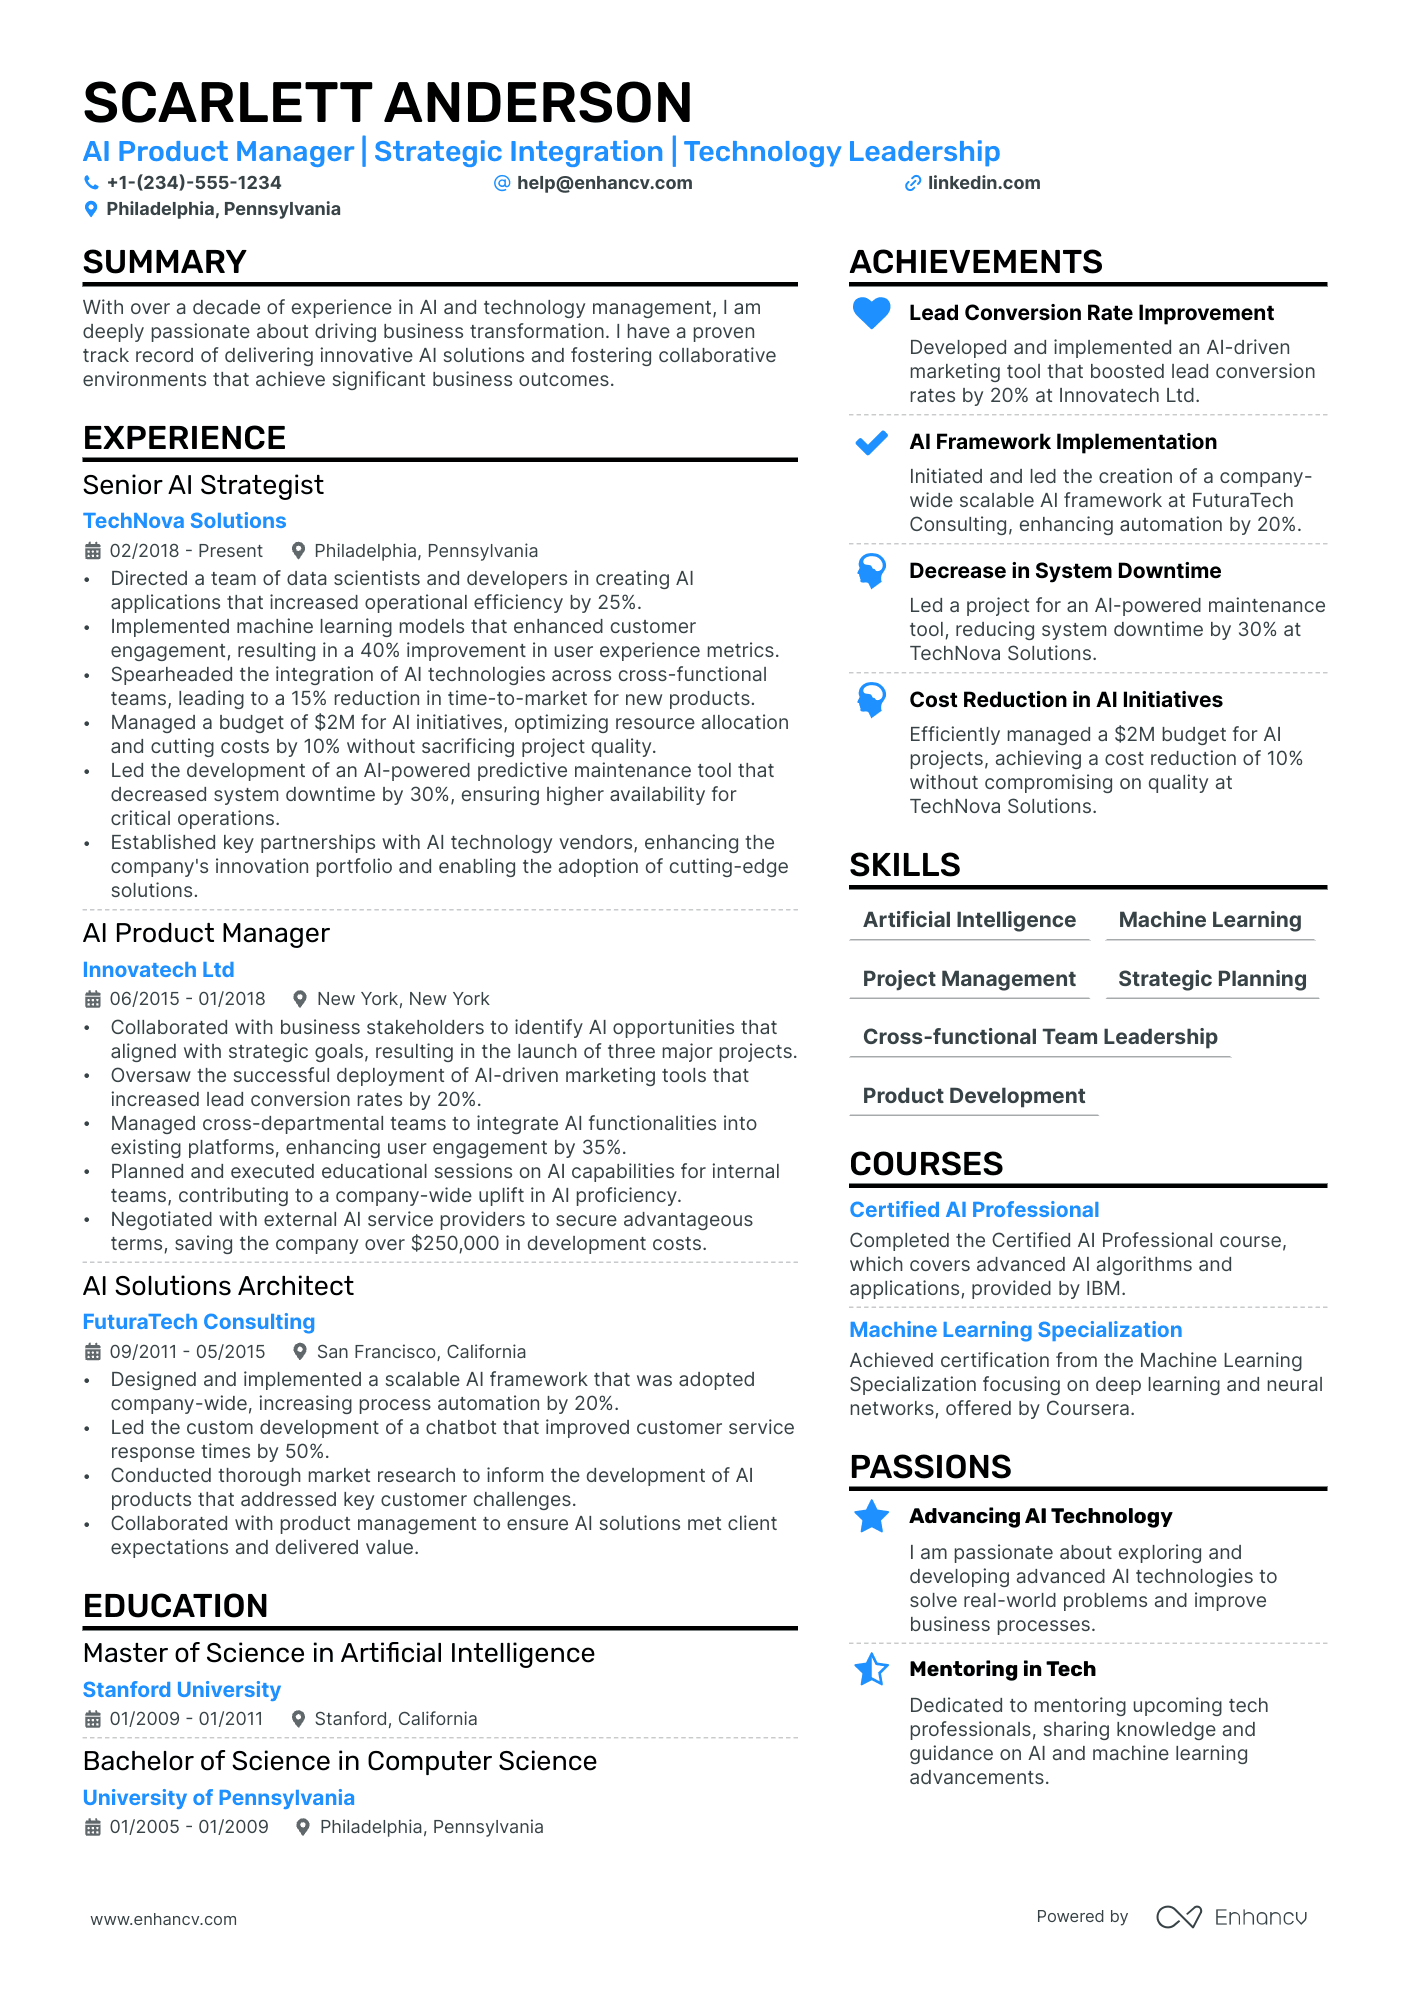 AI Product Manager resume example